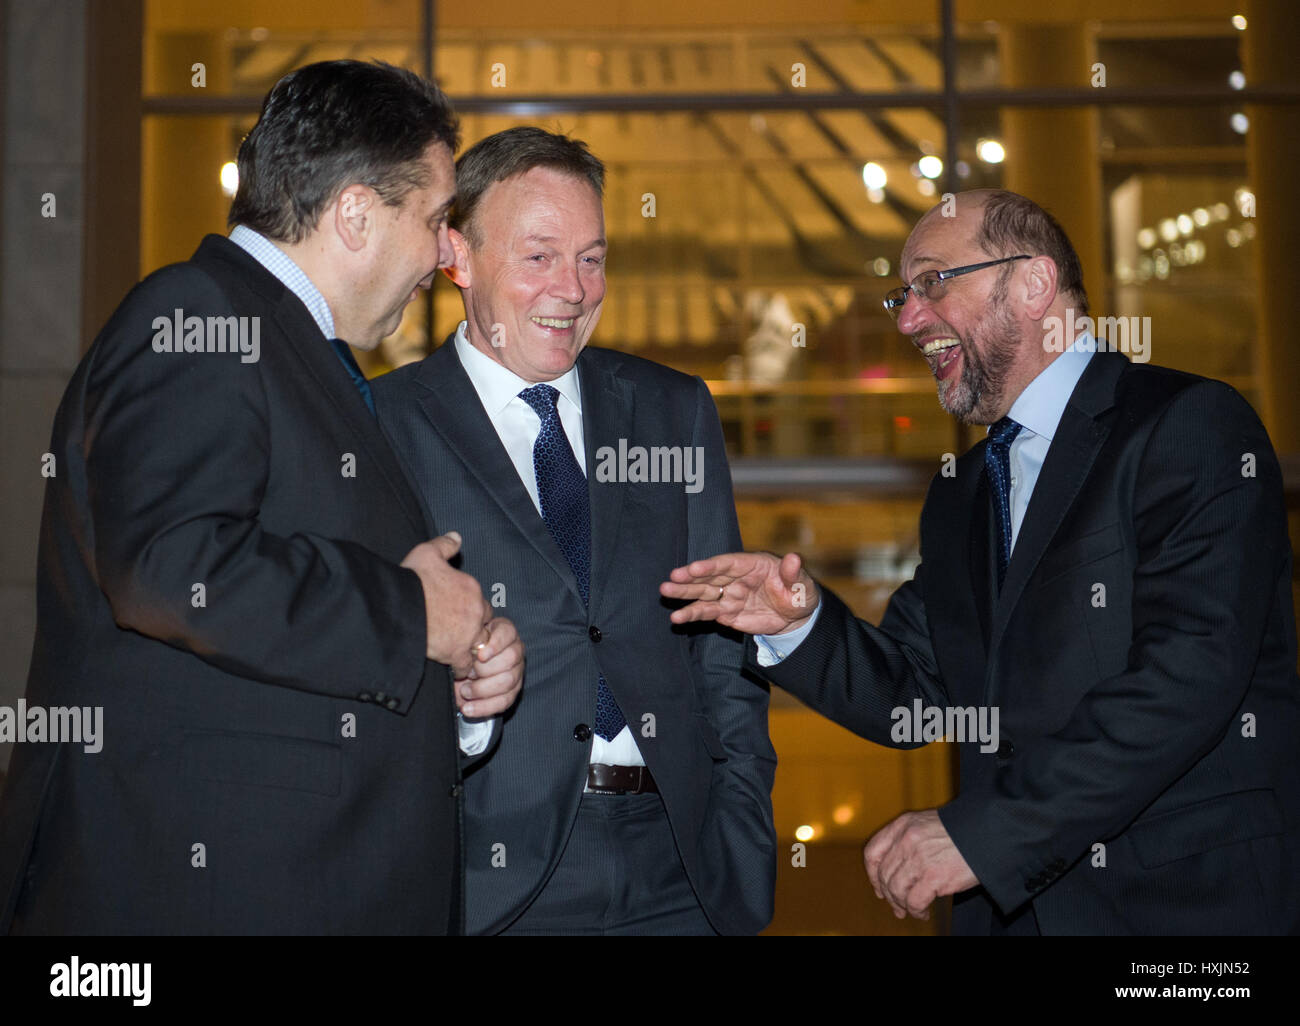 Berlin, Germany. 29th Mar, 2017. (L-R) German Foreign Minister Sigmar Gabriel, candidate for the German Chancellorship, Martin Schulz, and faction leader, Thomas Oppermann, after the spring reception of the SPD (Social Democratic Party of Germany) parliamentary group in Berlin, Germany, 29 March 2017. Photo: Soeren Stache/dpa/Alamy Live News Stock Photo